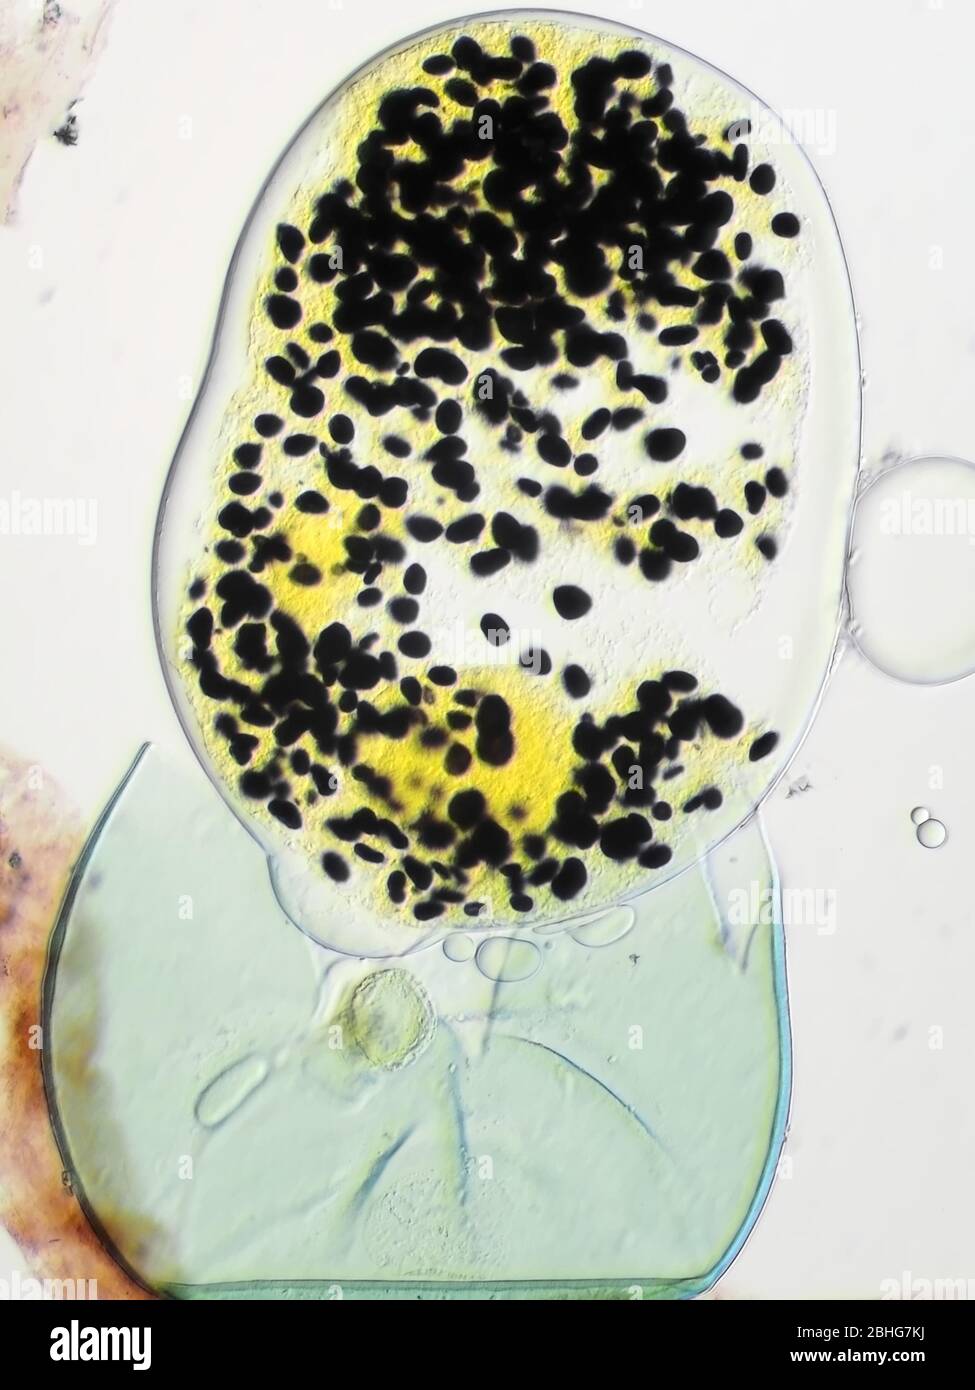 Unidentified relatively large burst spore or pollen particle under the microscope, vertical field of view is about 0.24mm Stock Photo